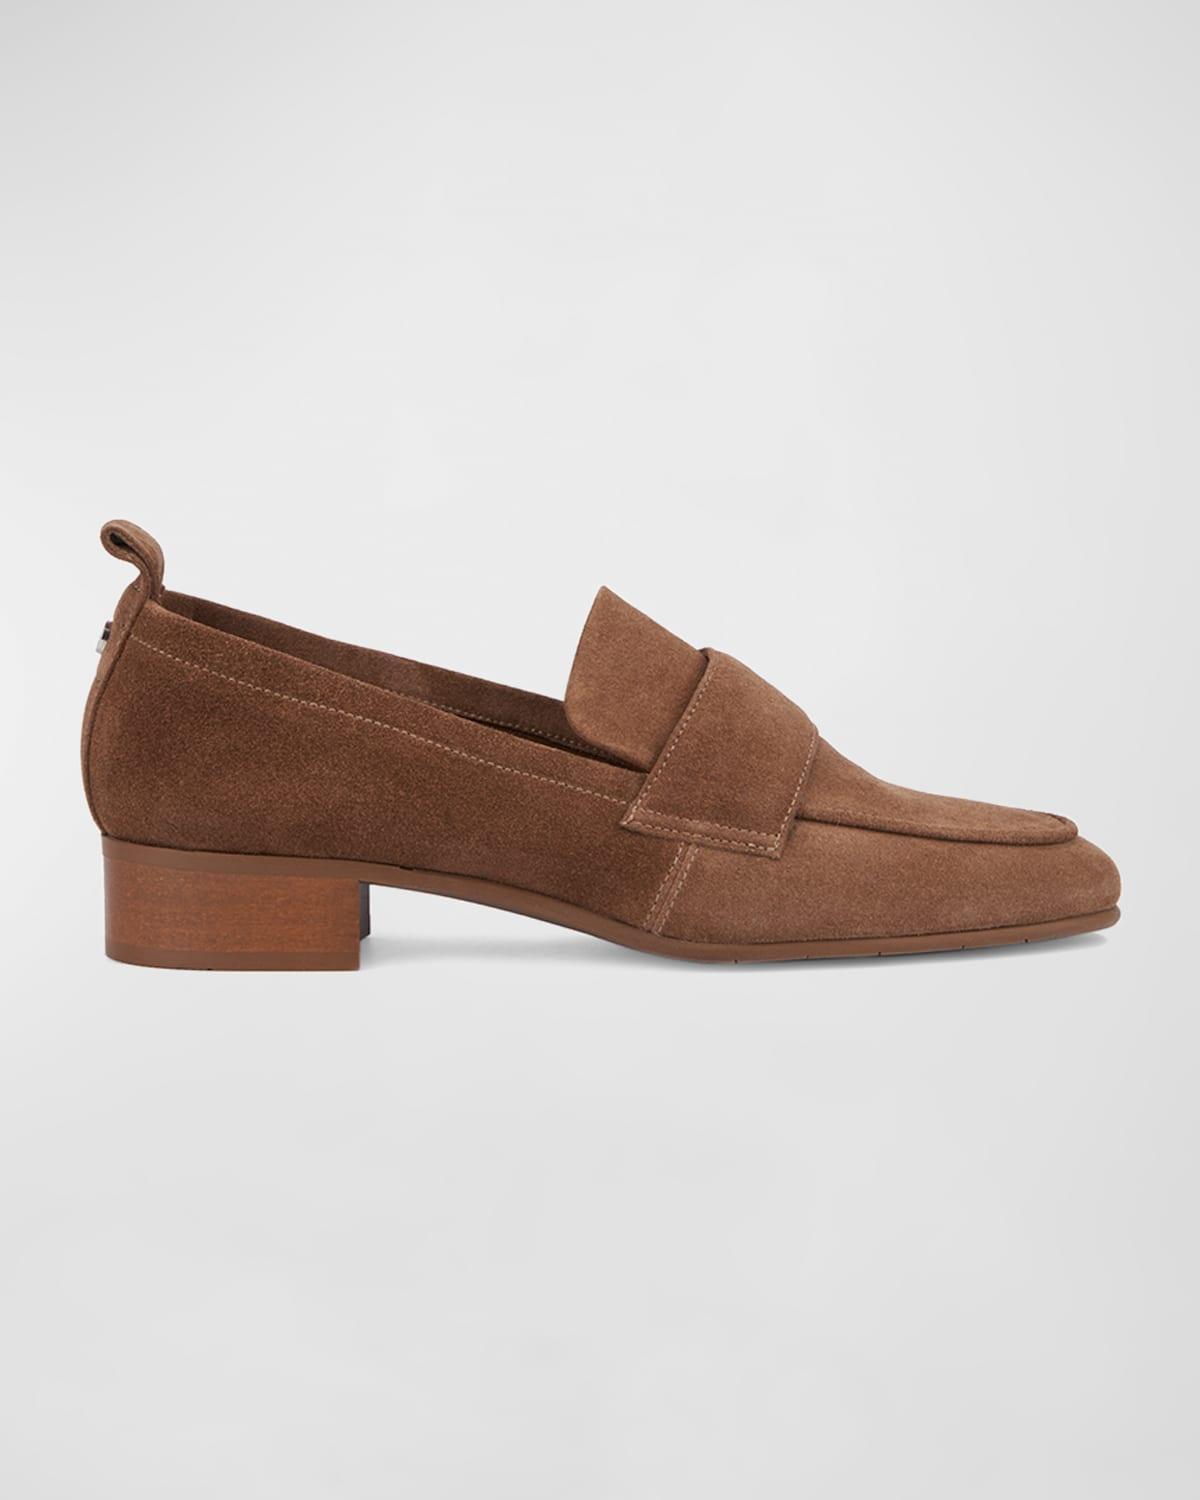 Shivani Weatherproof Suede Penny Loafers Product Image